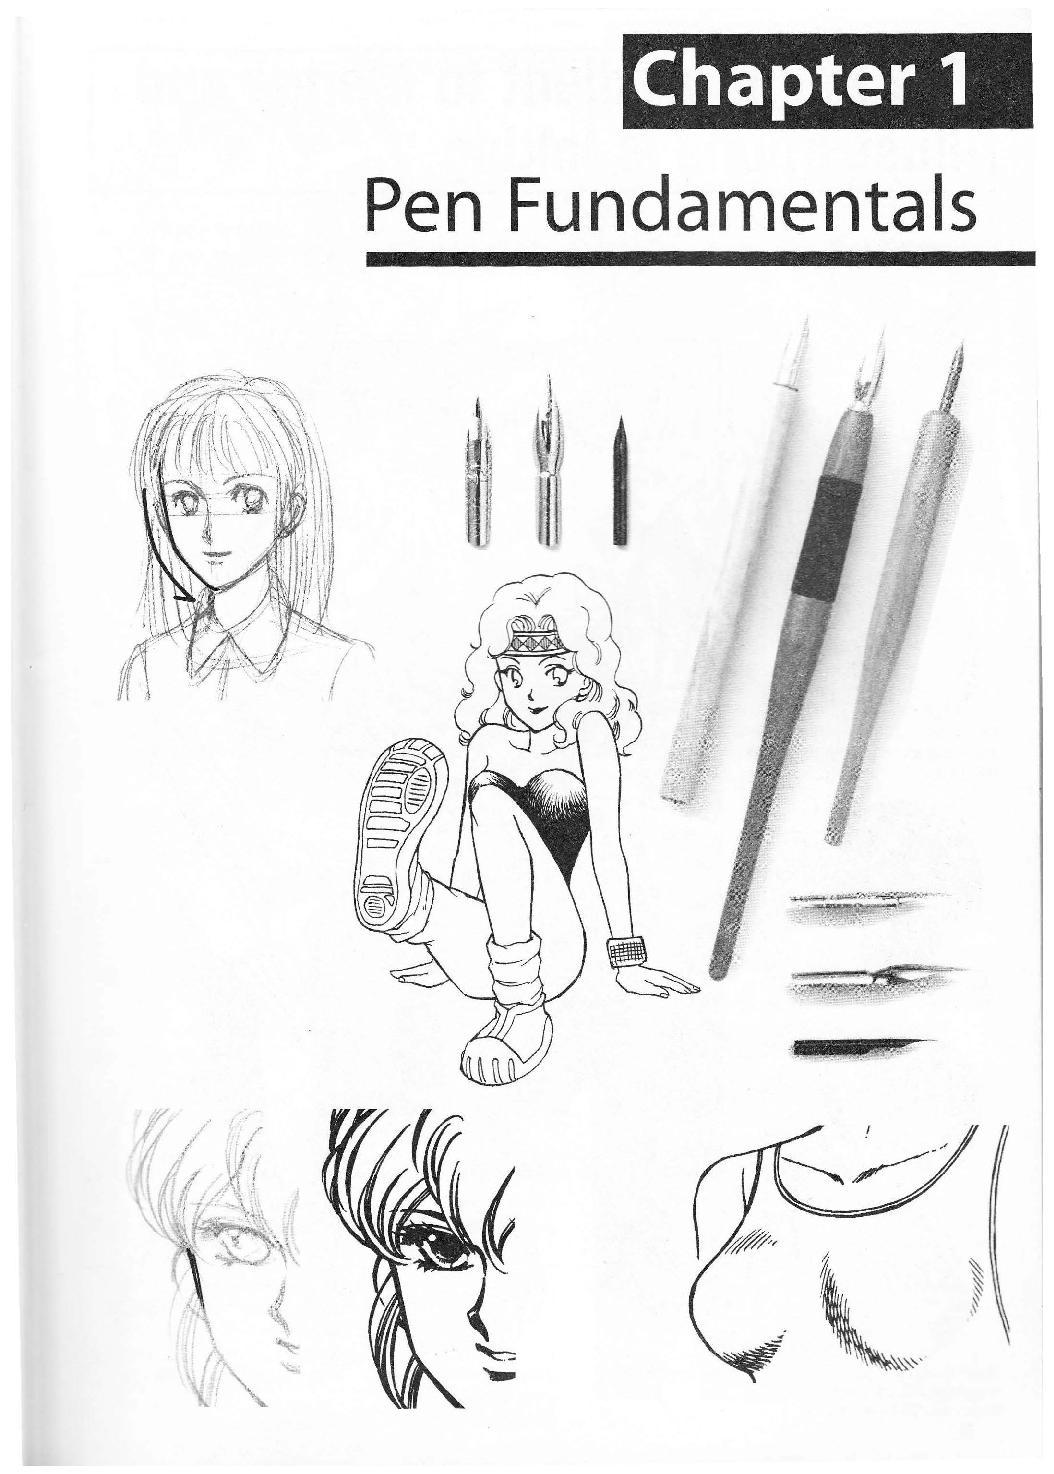 More How to Draw Manga Vol. 2 - Penning Characters 8